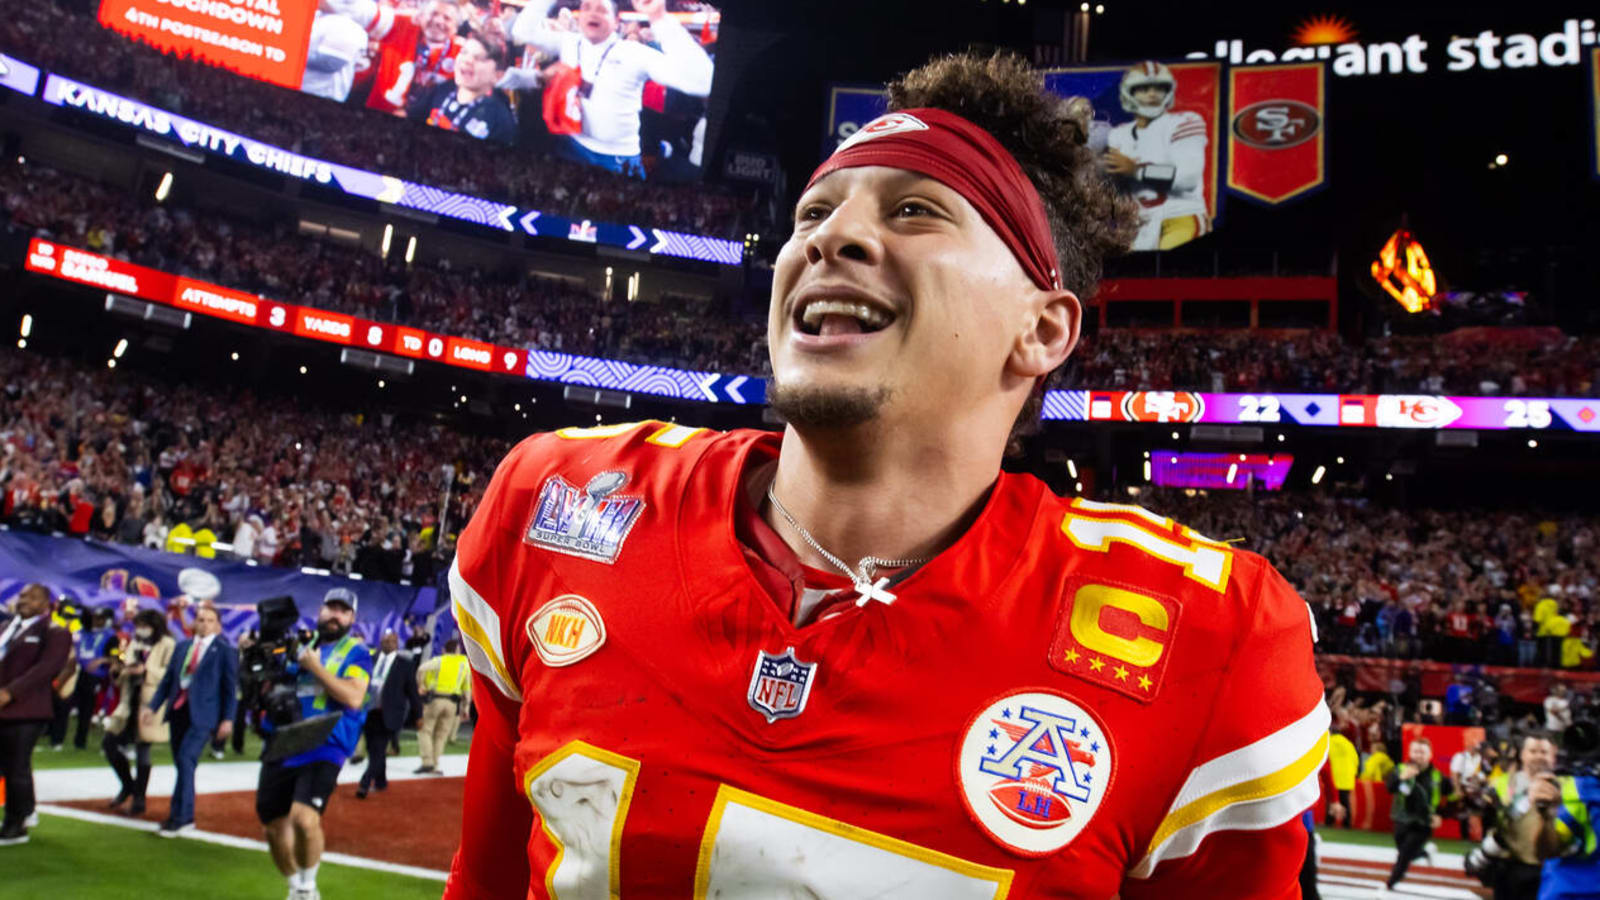 Patrick Mahomes discusses play that won Chiefs the Super Bowl